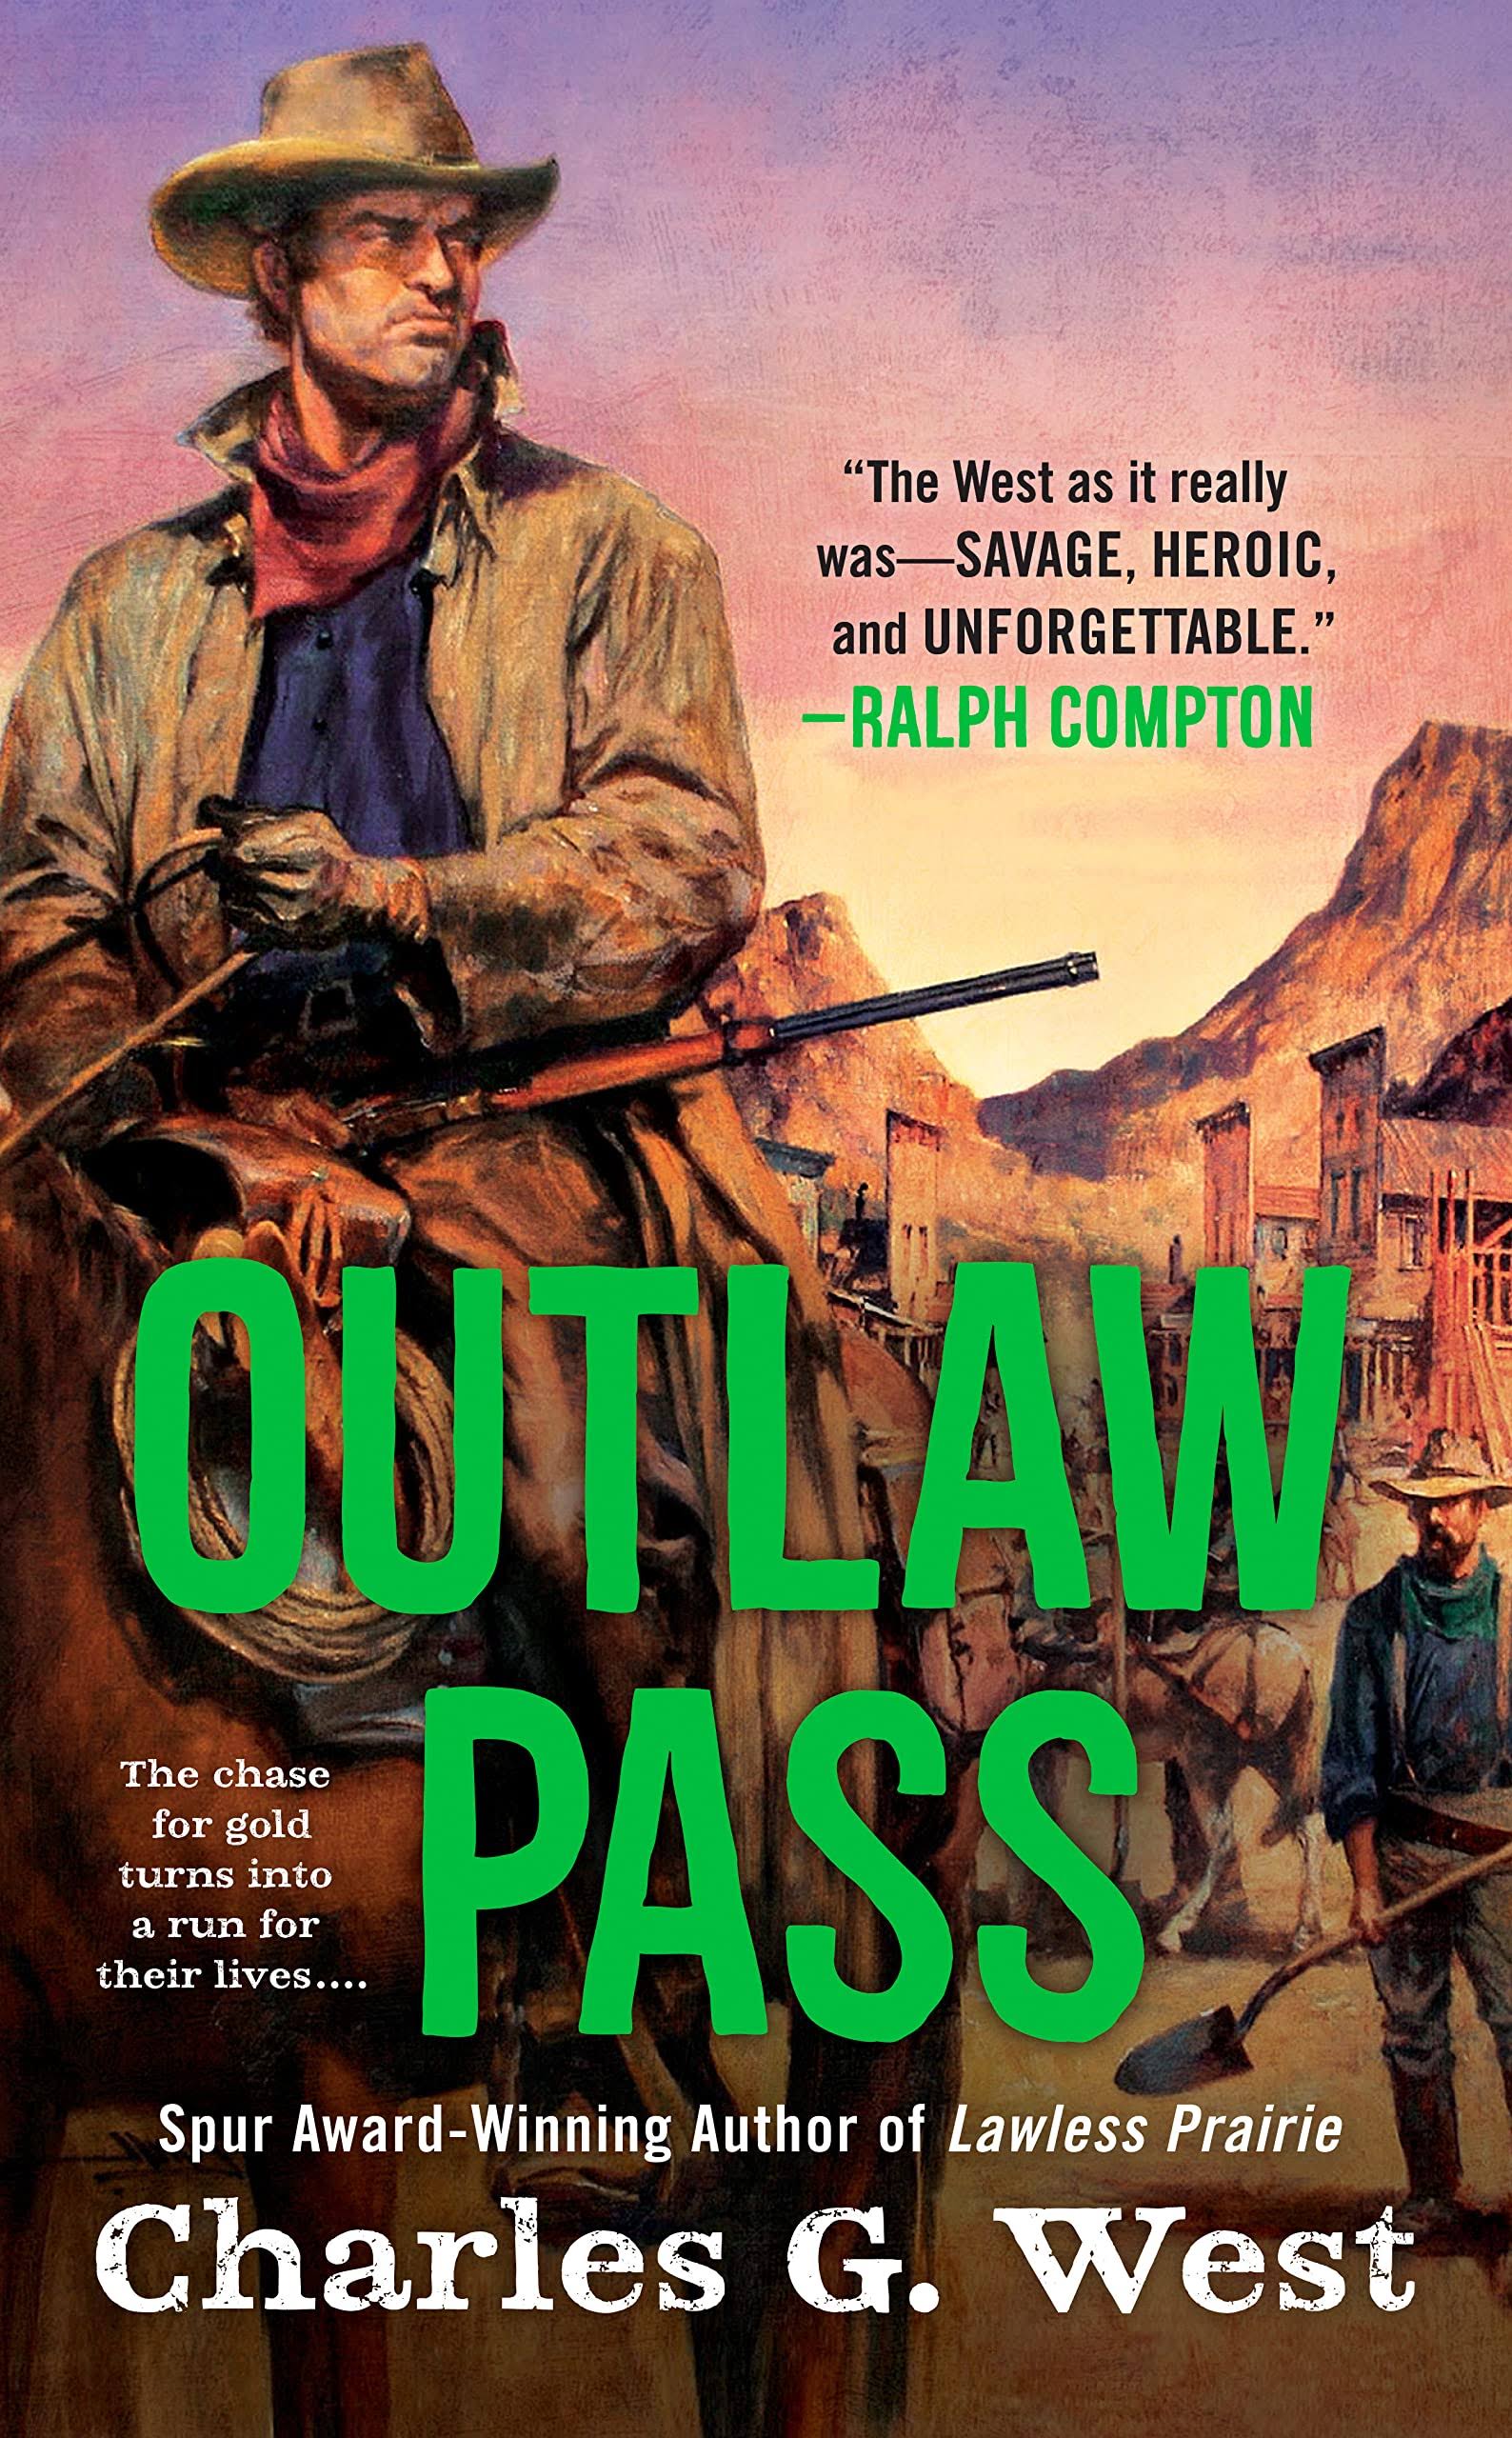 Outlaw Pass: Signet Historical Novel - Charles G. West